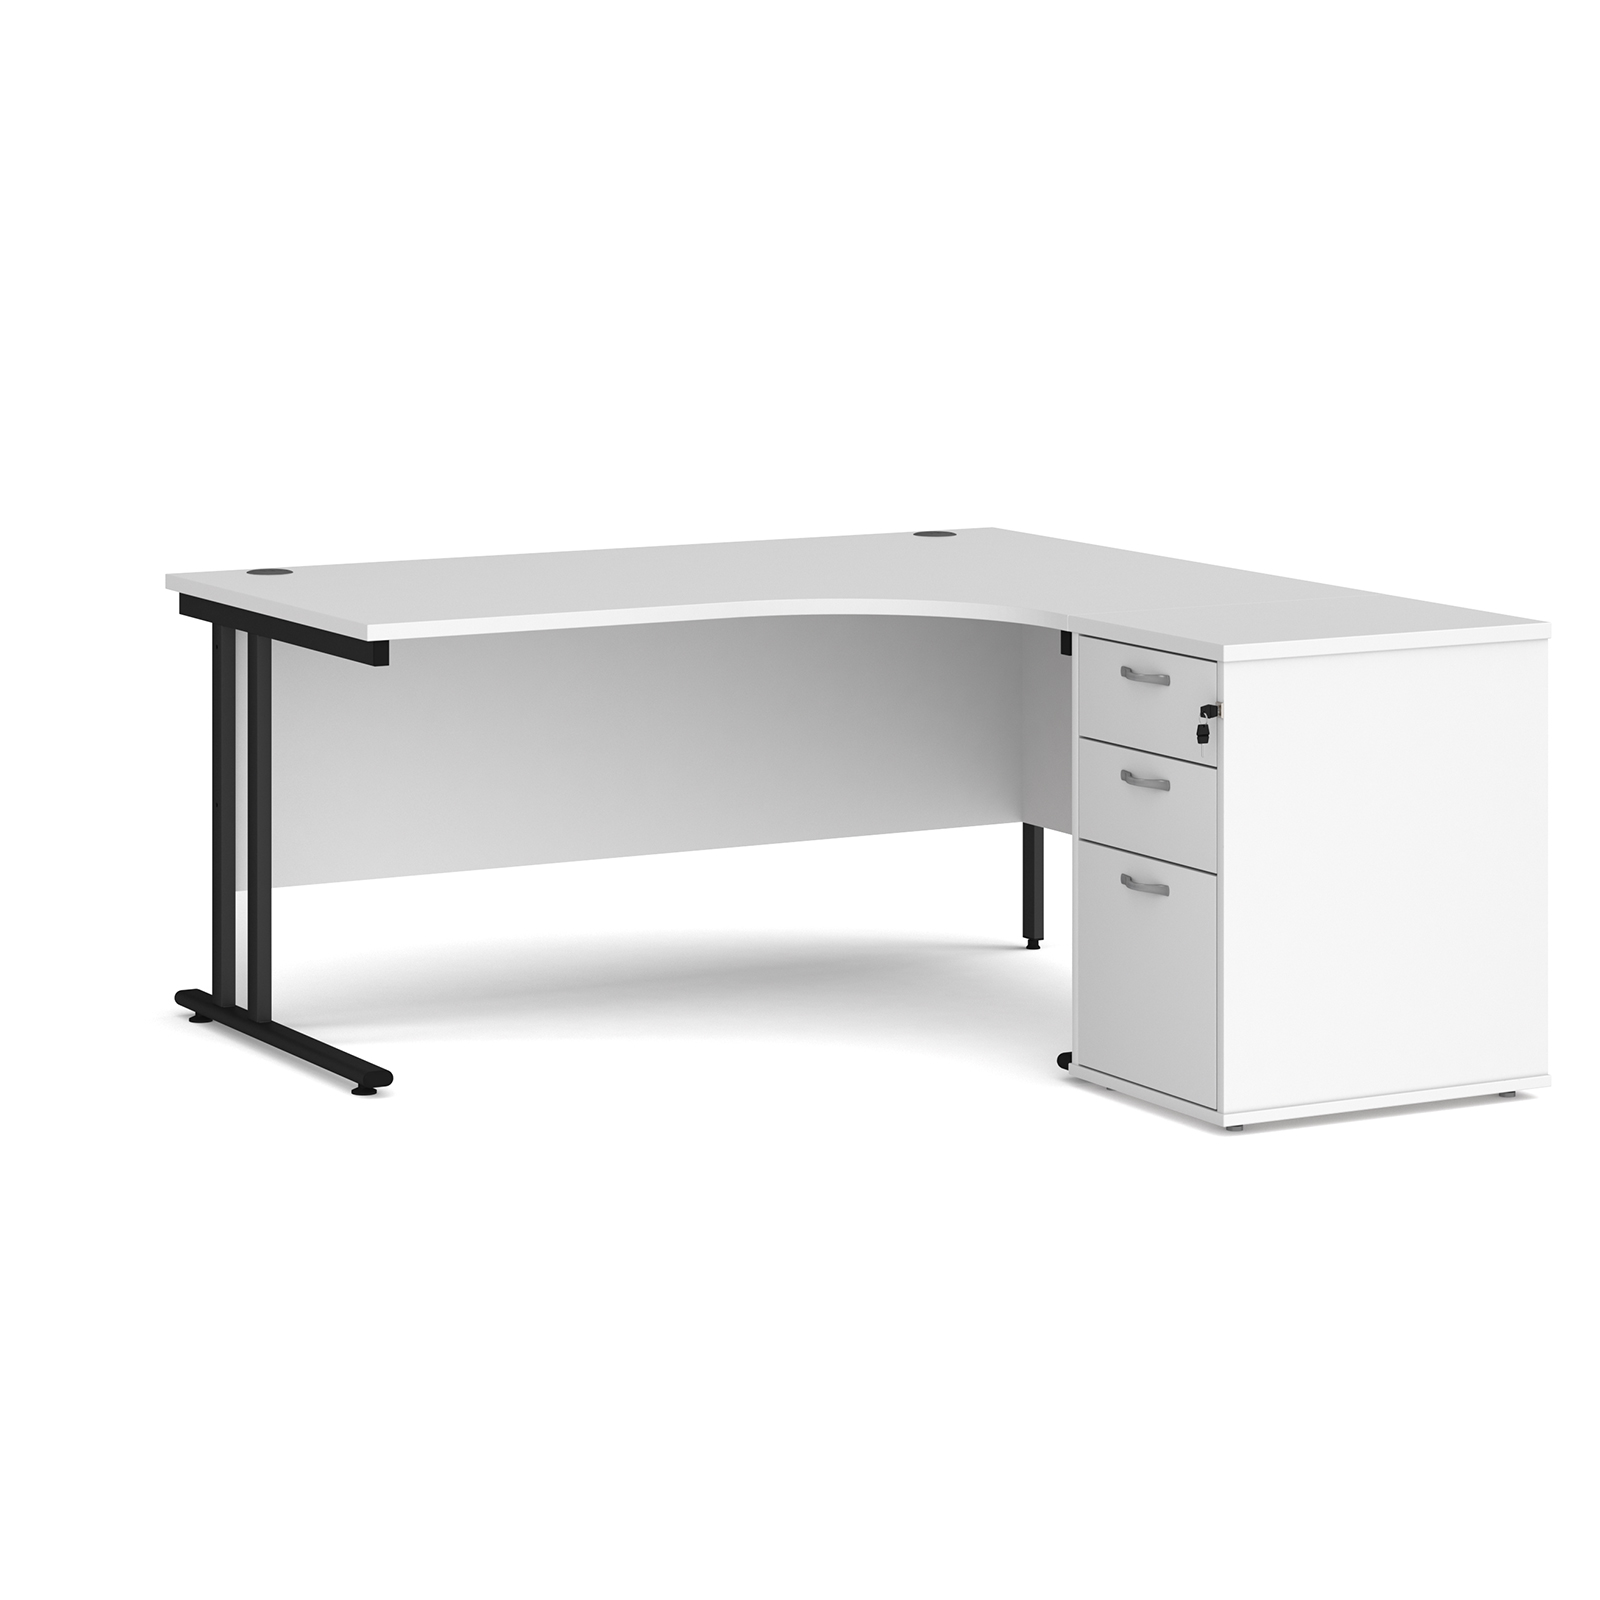 Right Handed Maestro 25 right hand ergonomic desk 1600mm with black cantilever frame and desk high pedestal - white